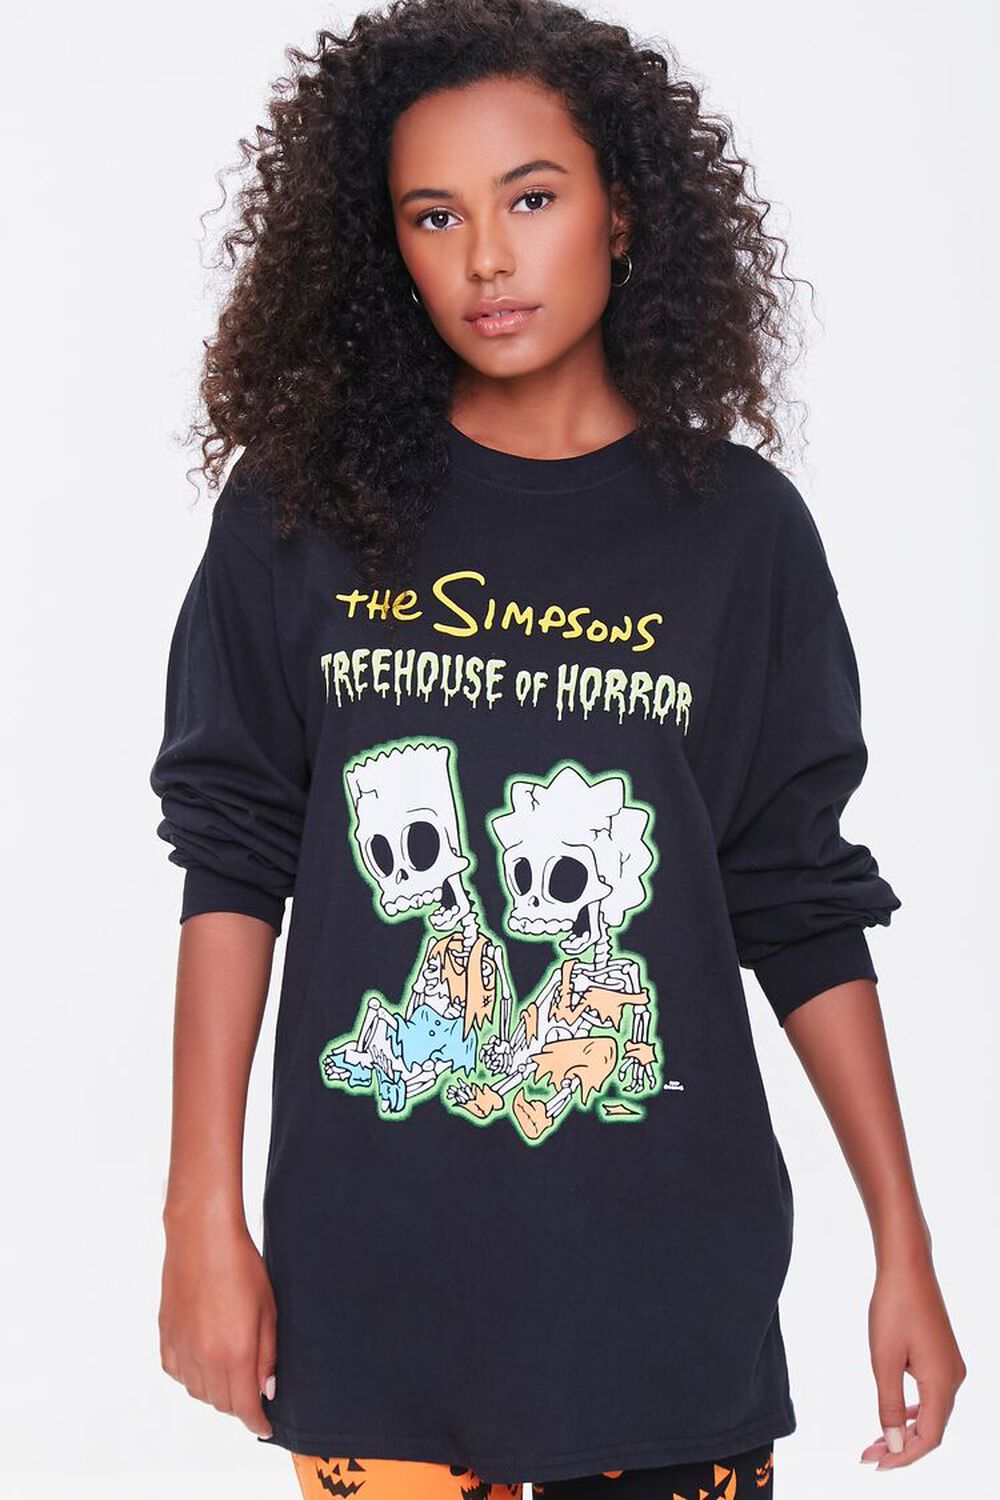 CHARCOAL/MULTI The Simpsons Skeleton Graphic Tee, image 1